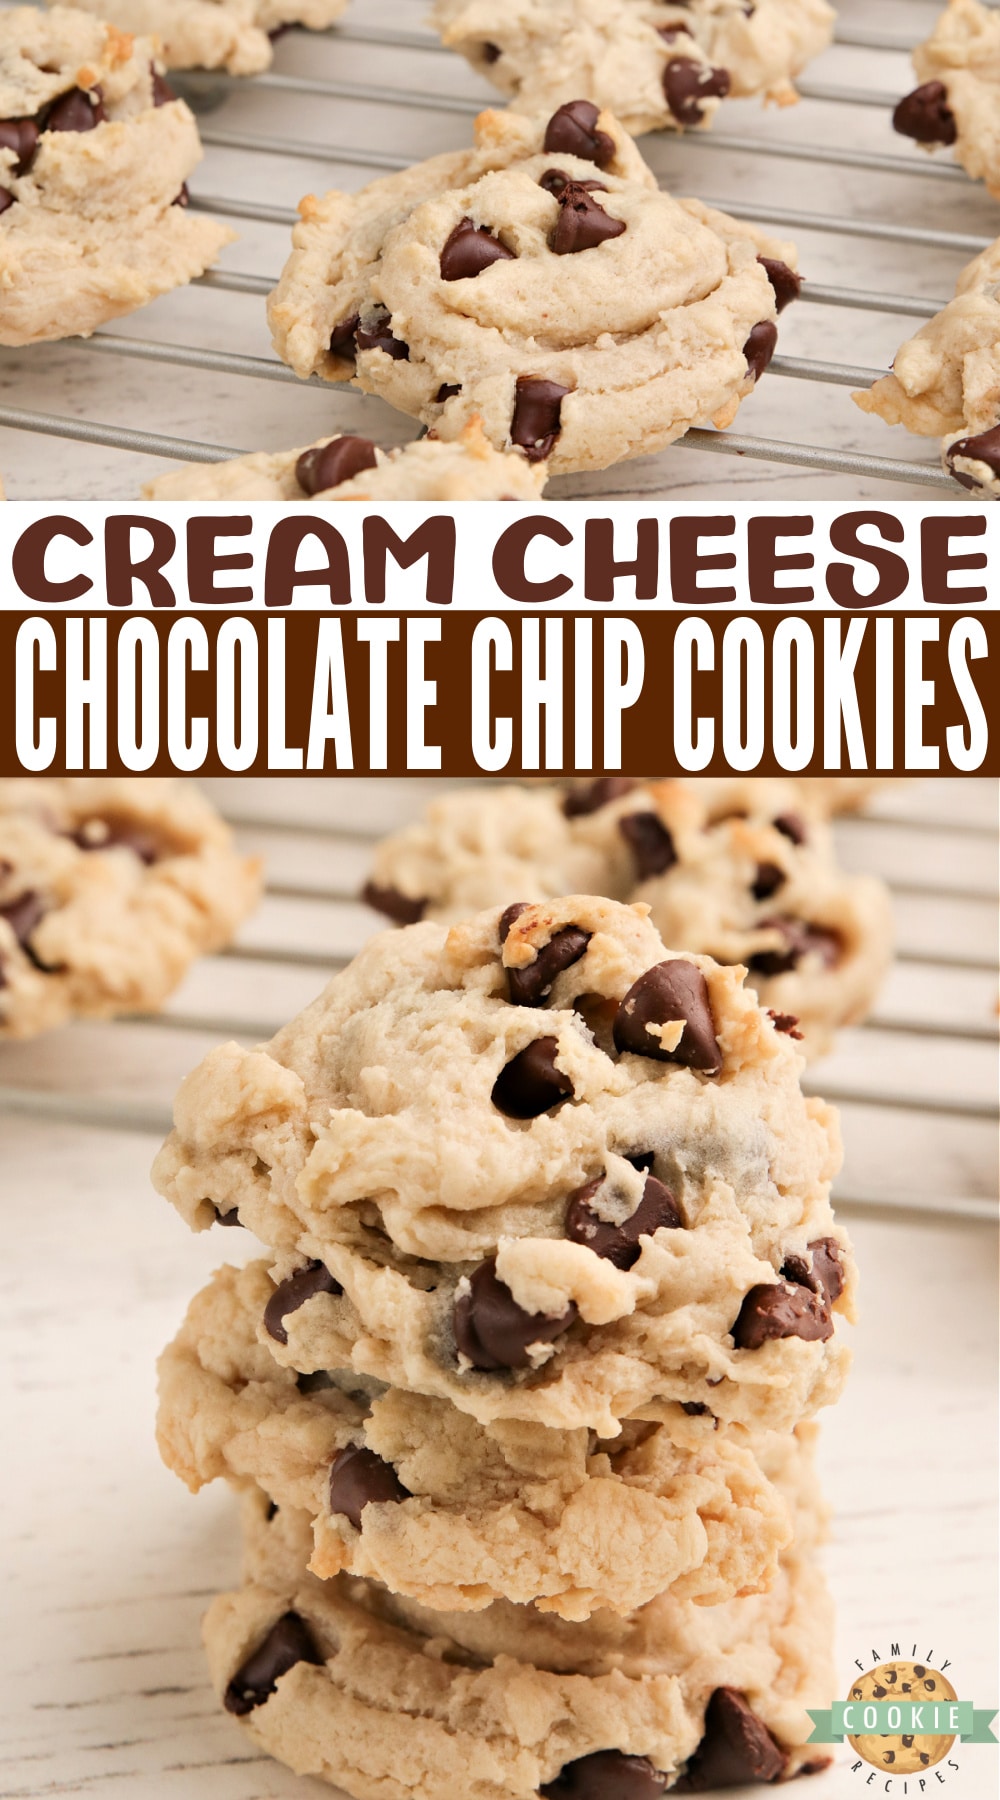 Cream Cheese Chocolate Chip Cookies are so soft, chewy and don't require any eggs. One of my favorite chocolate chip cookie recipes! 